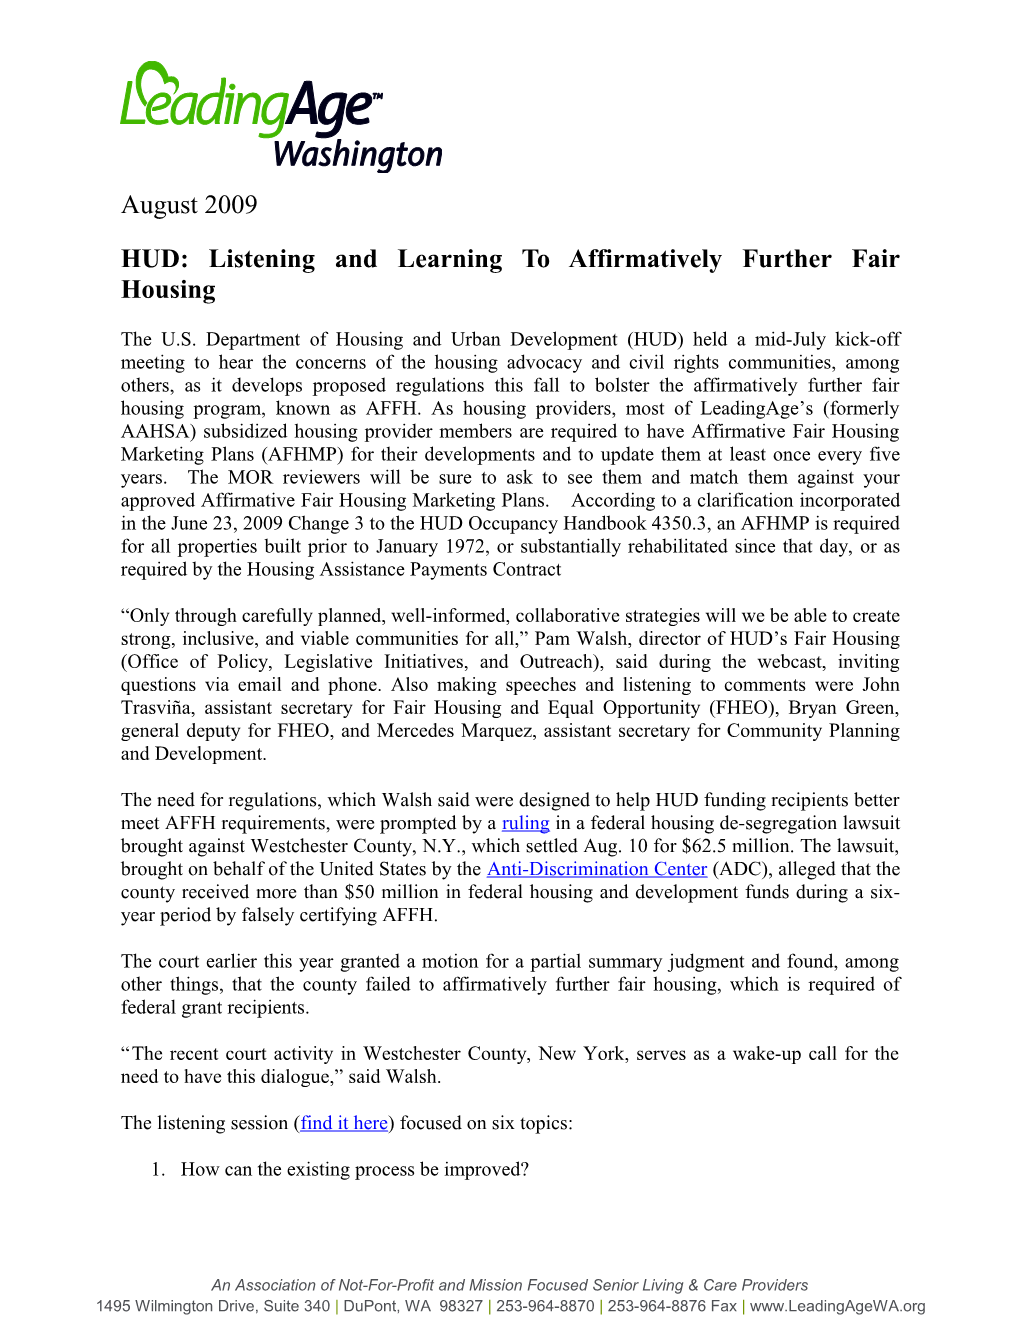 HUD: Listening and Learning to Affirmatively Further Fair Housing